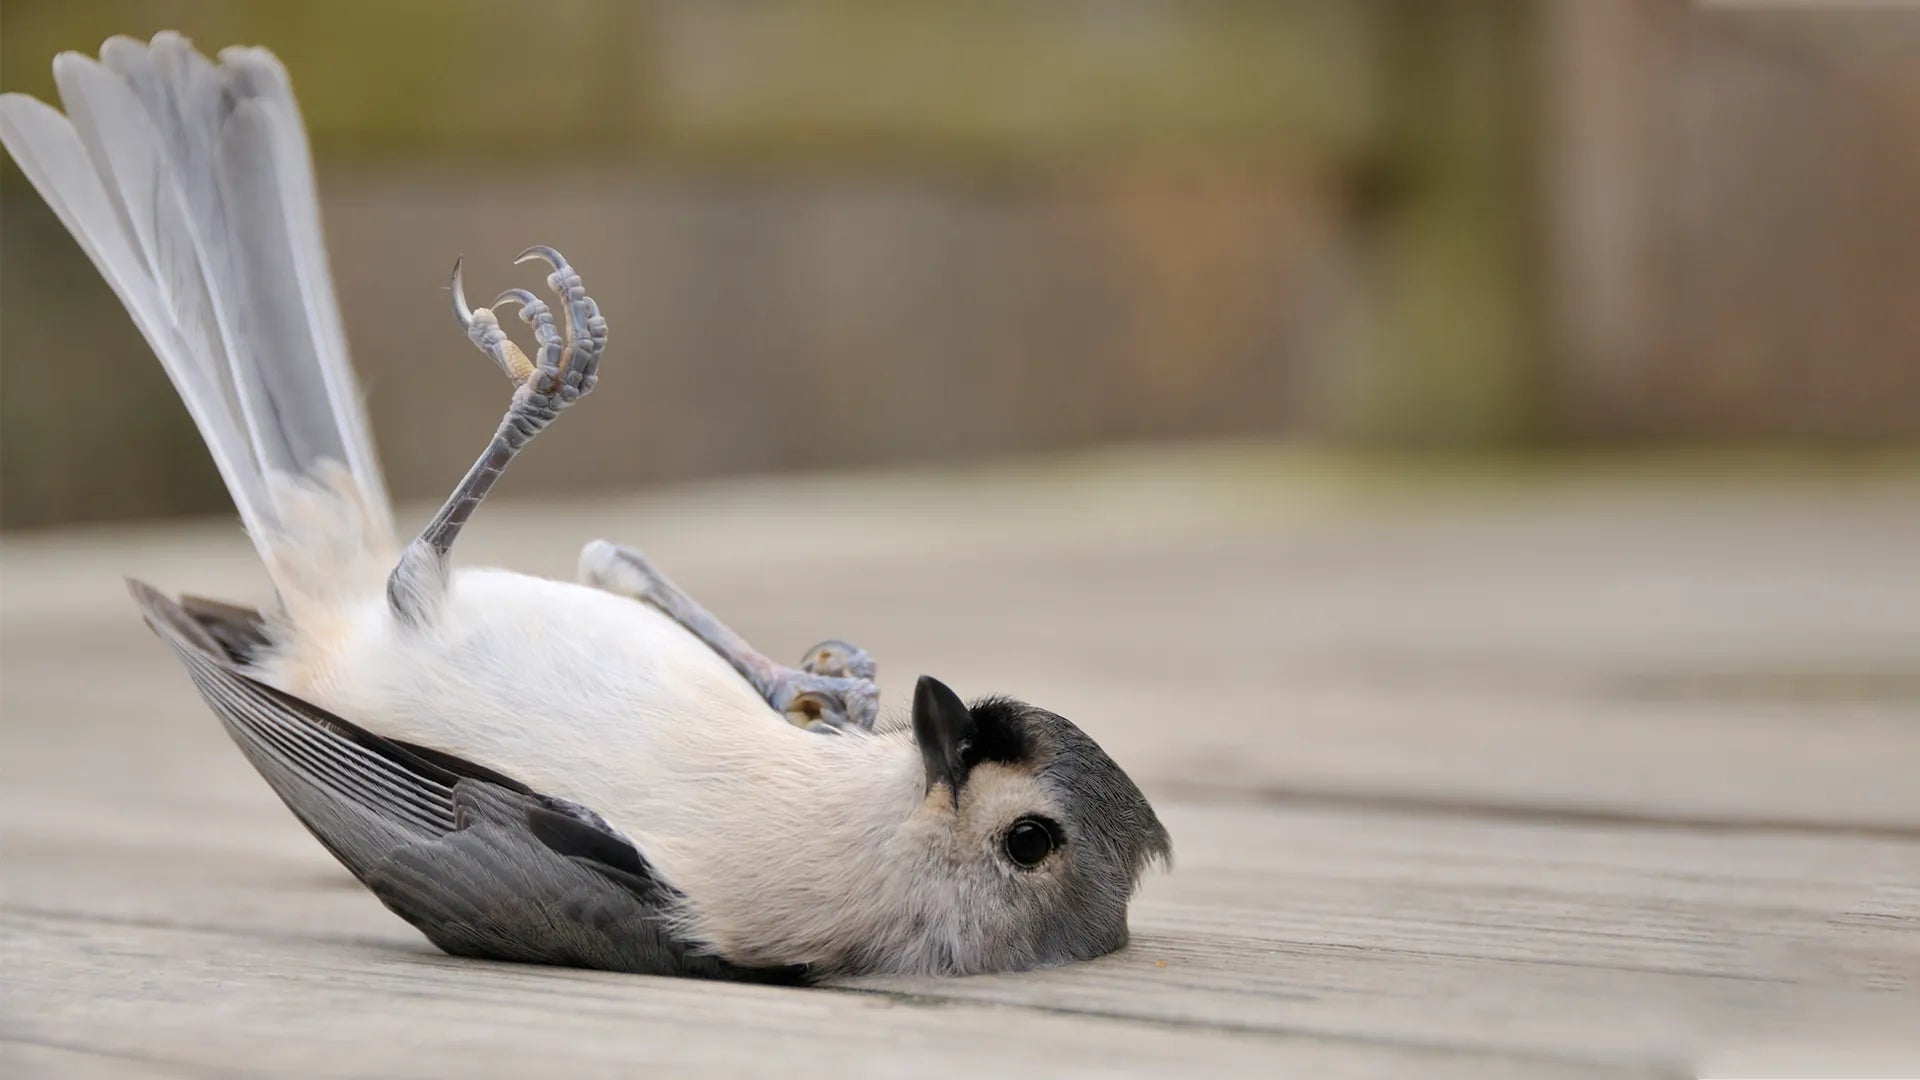 How to Rescue a Trapped Bird